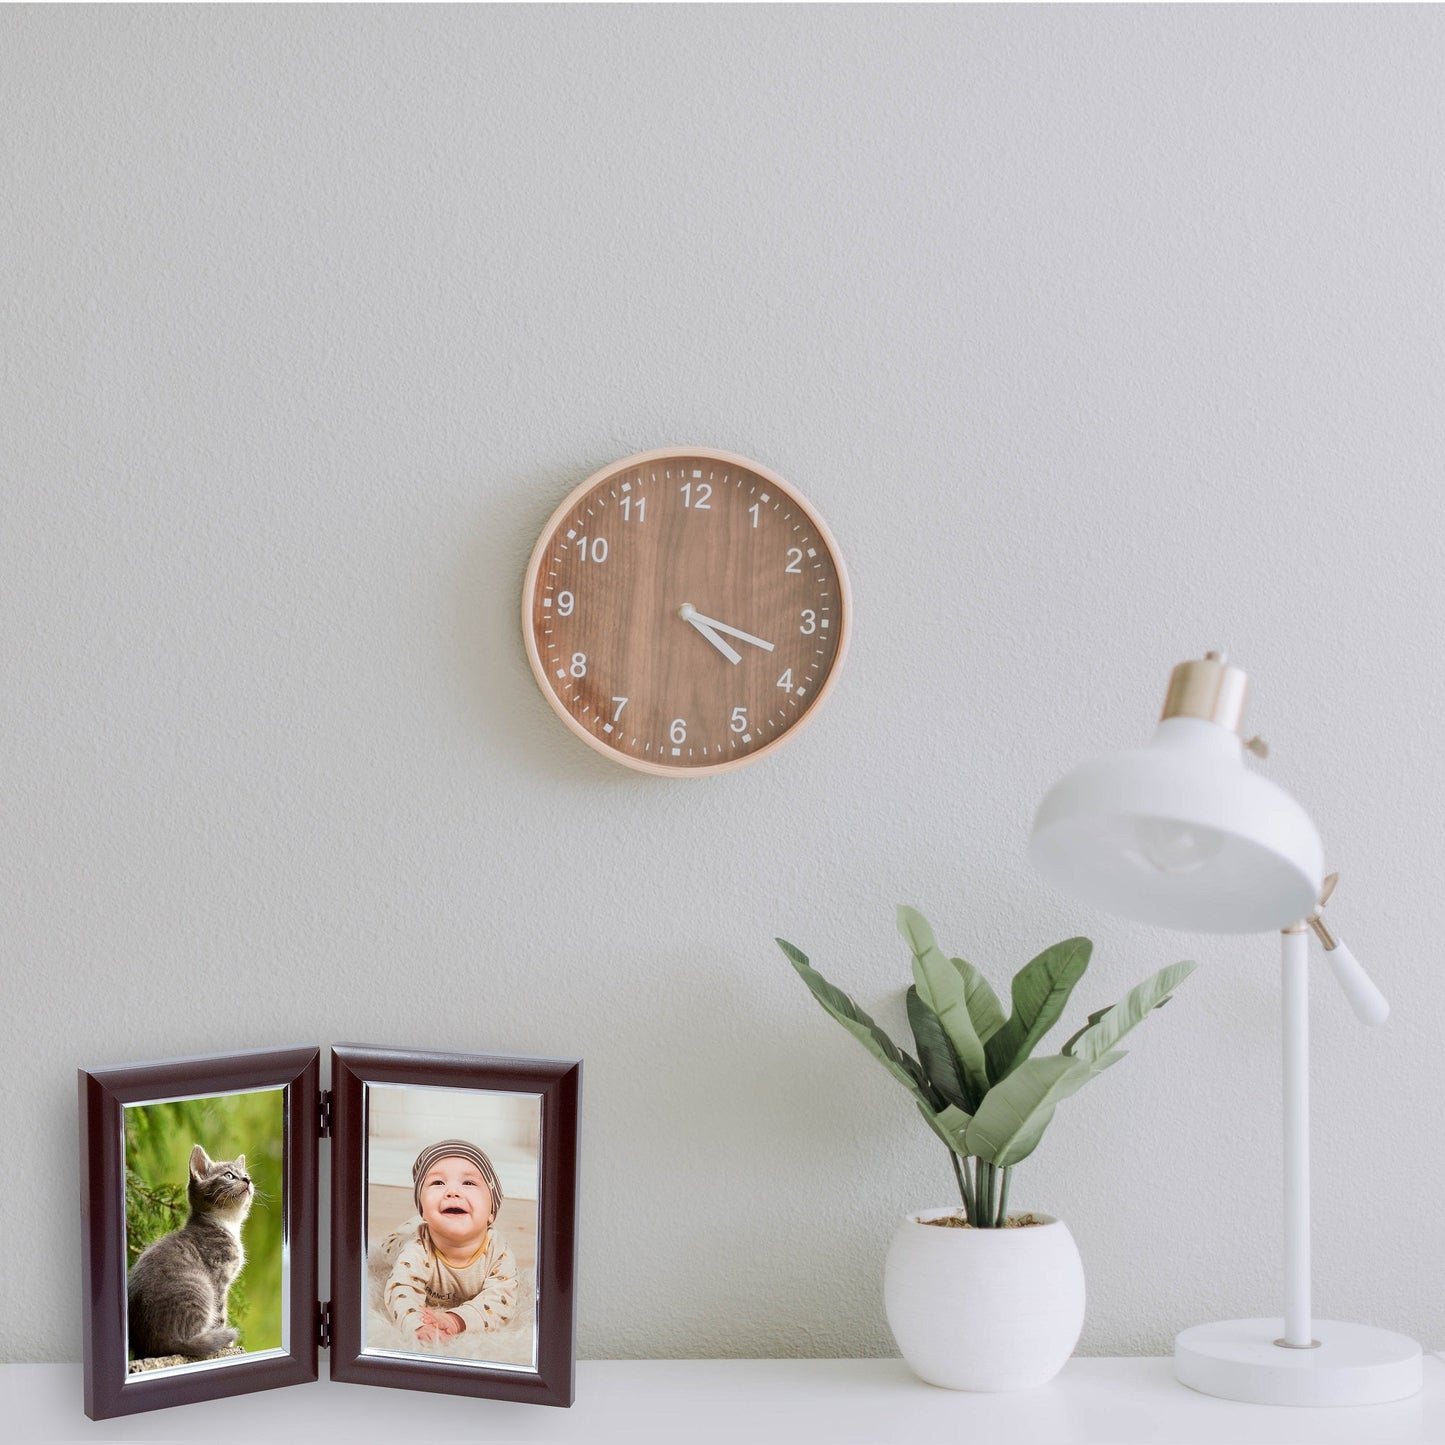 Dual Picture Photo Frame - For 2 4x6" Pictures - Vertical - Easy Insert - Satin Mocha - Table Top Display